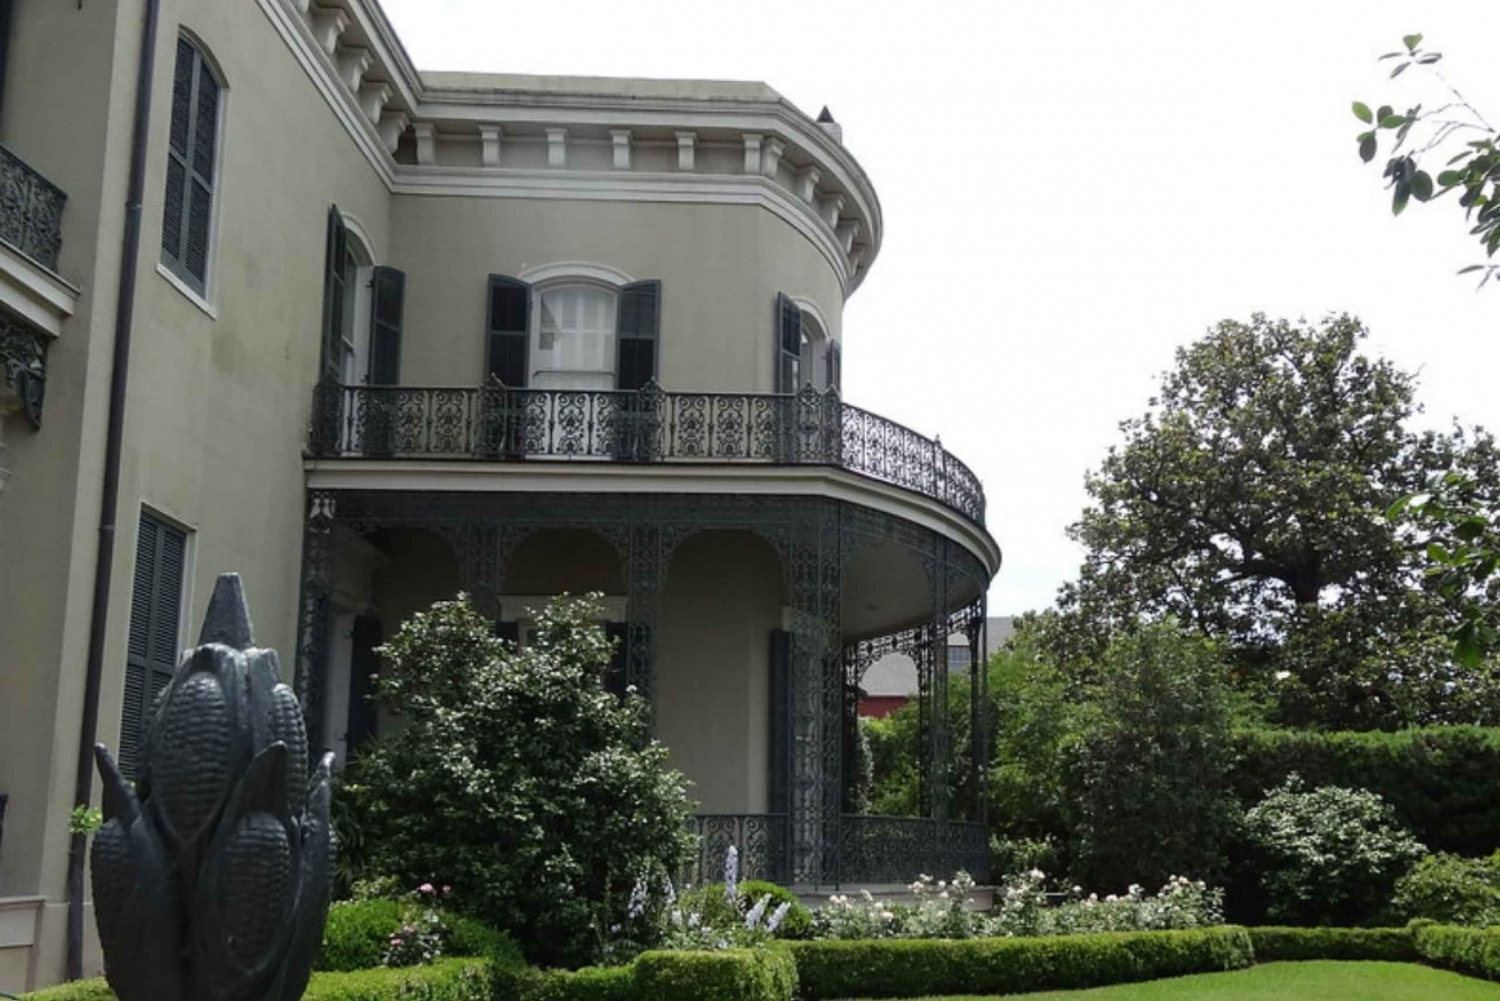 New Orleans: Tombs and Mansions of the Garden District